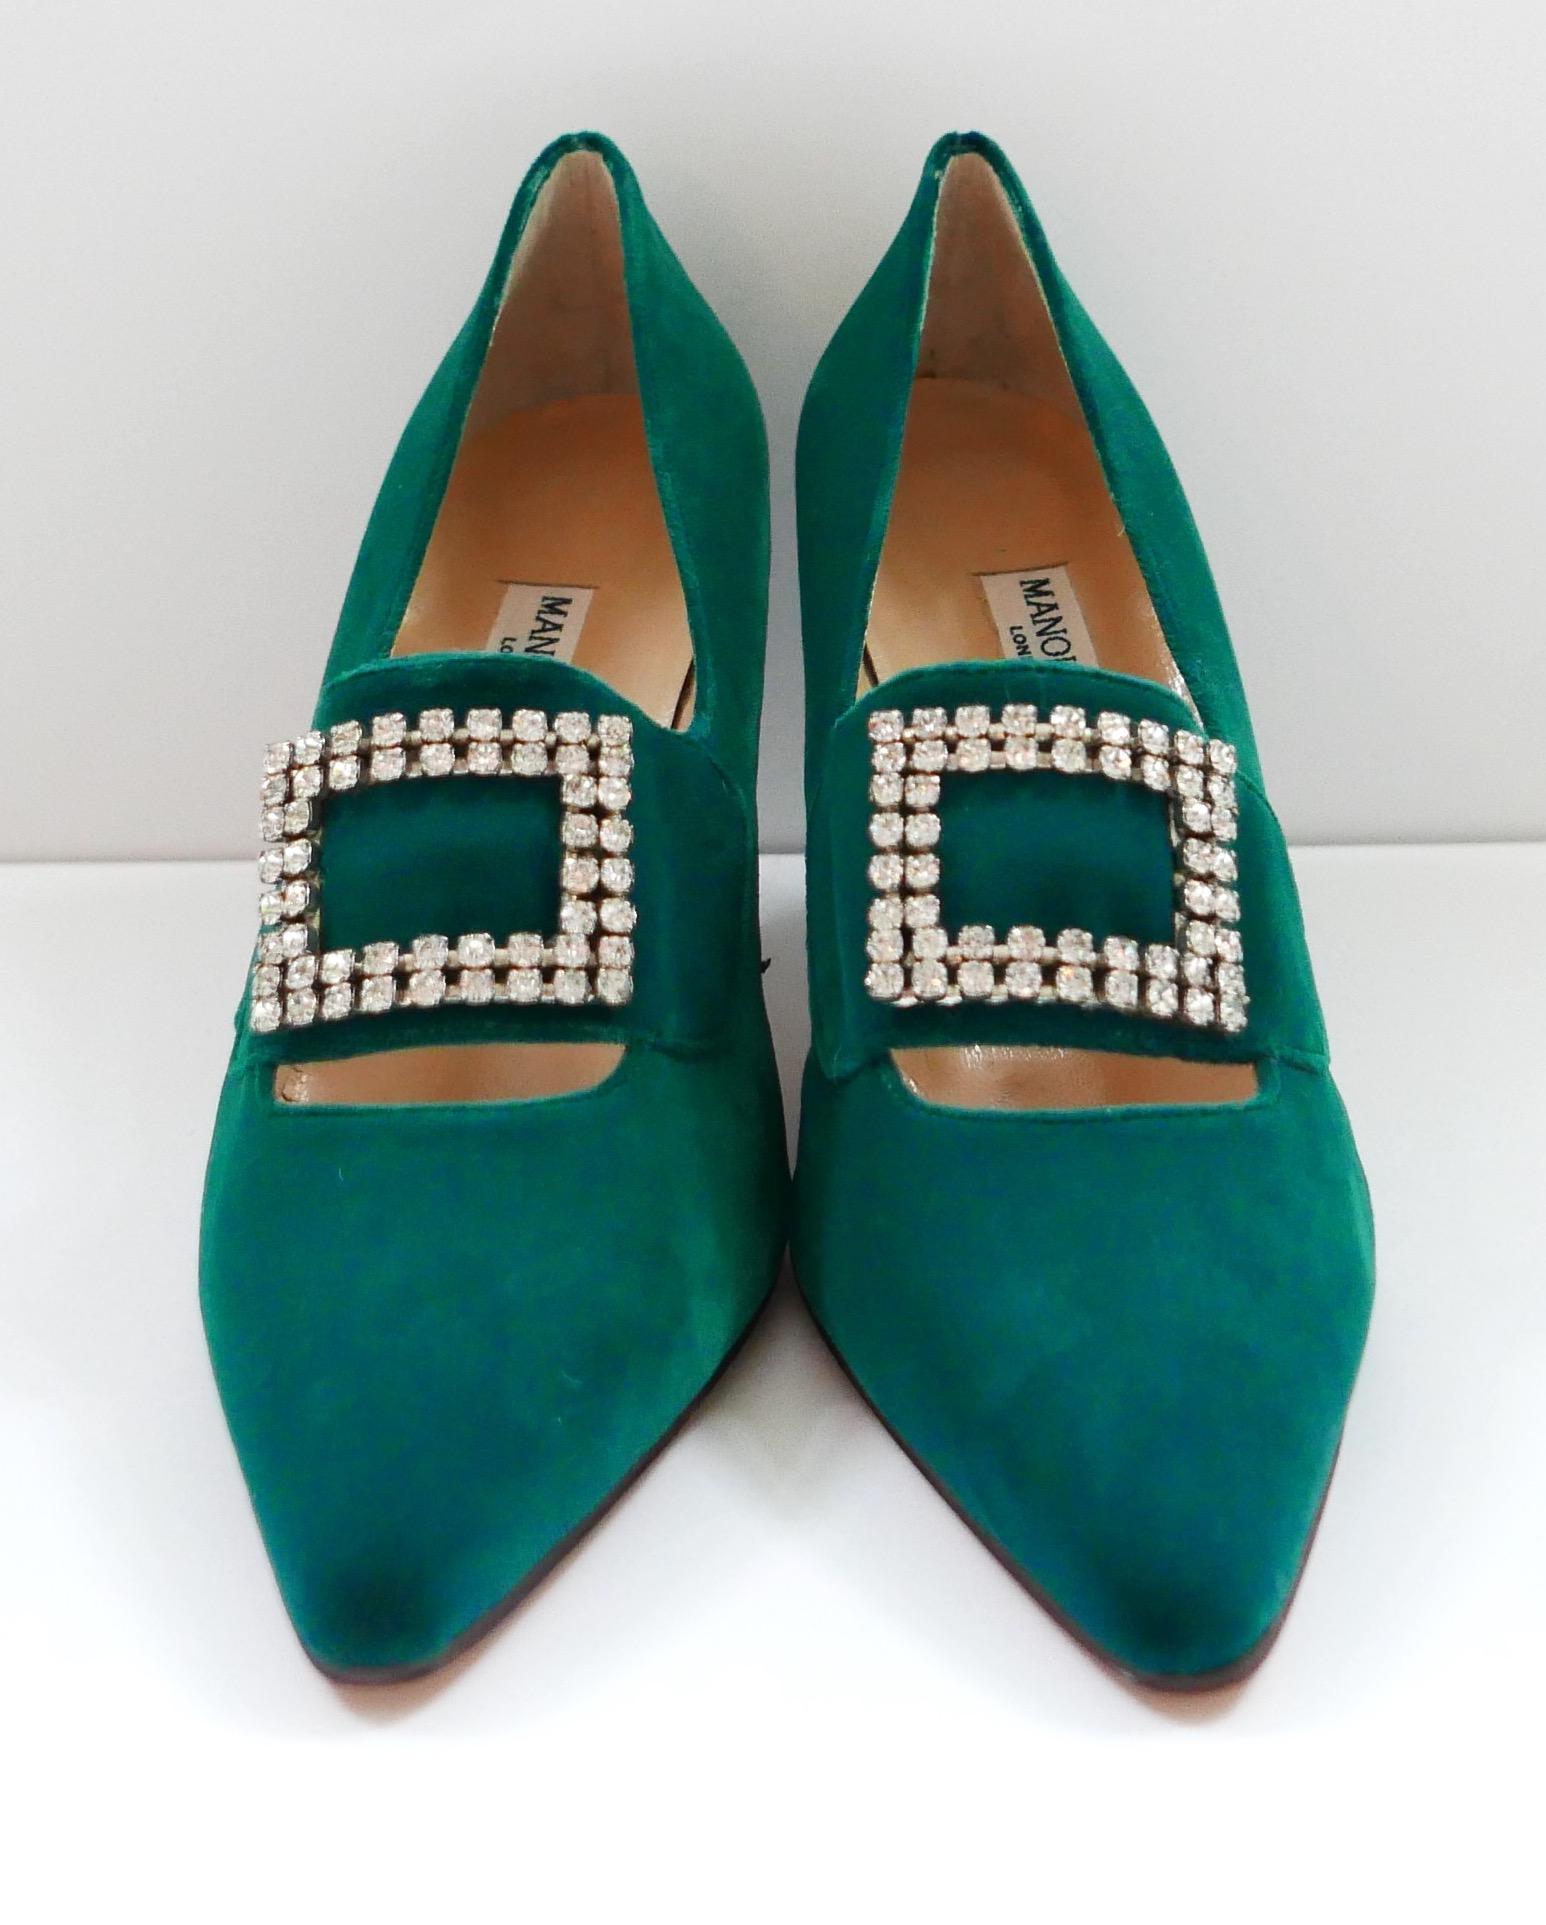 Gorgeous vintage Manolo Blahnik Regency pumps, in amazing unworn condition and come with dustbag. Made from emerald green velvet, they have elongated toes, faux strap fronts with sparkling crystal buckles and mid height curved heels. Size 39/UK6.